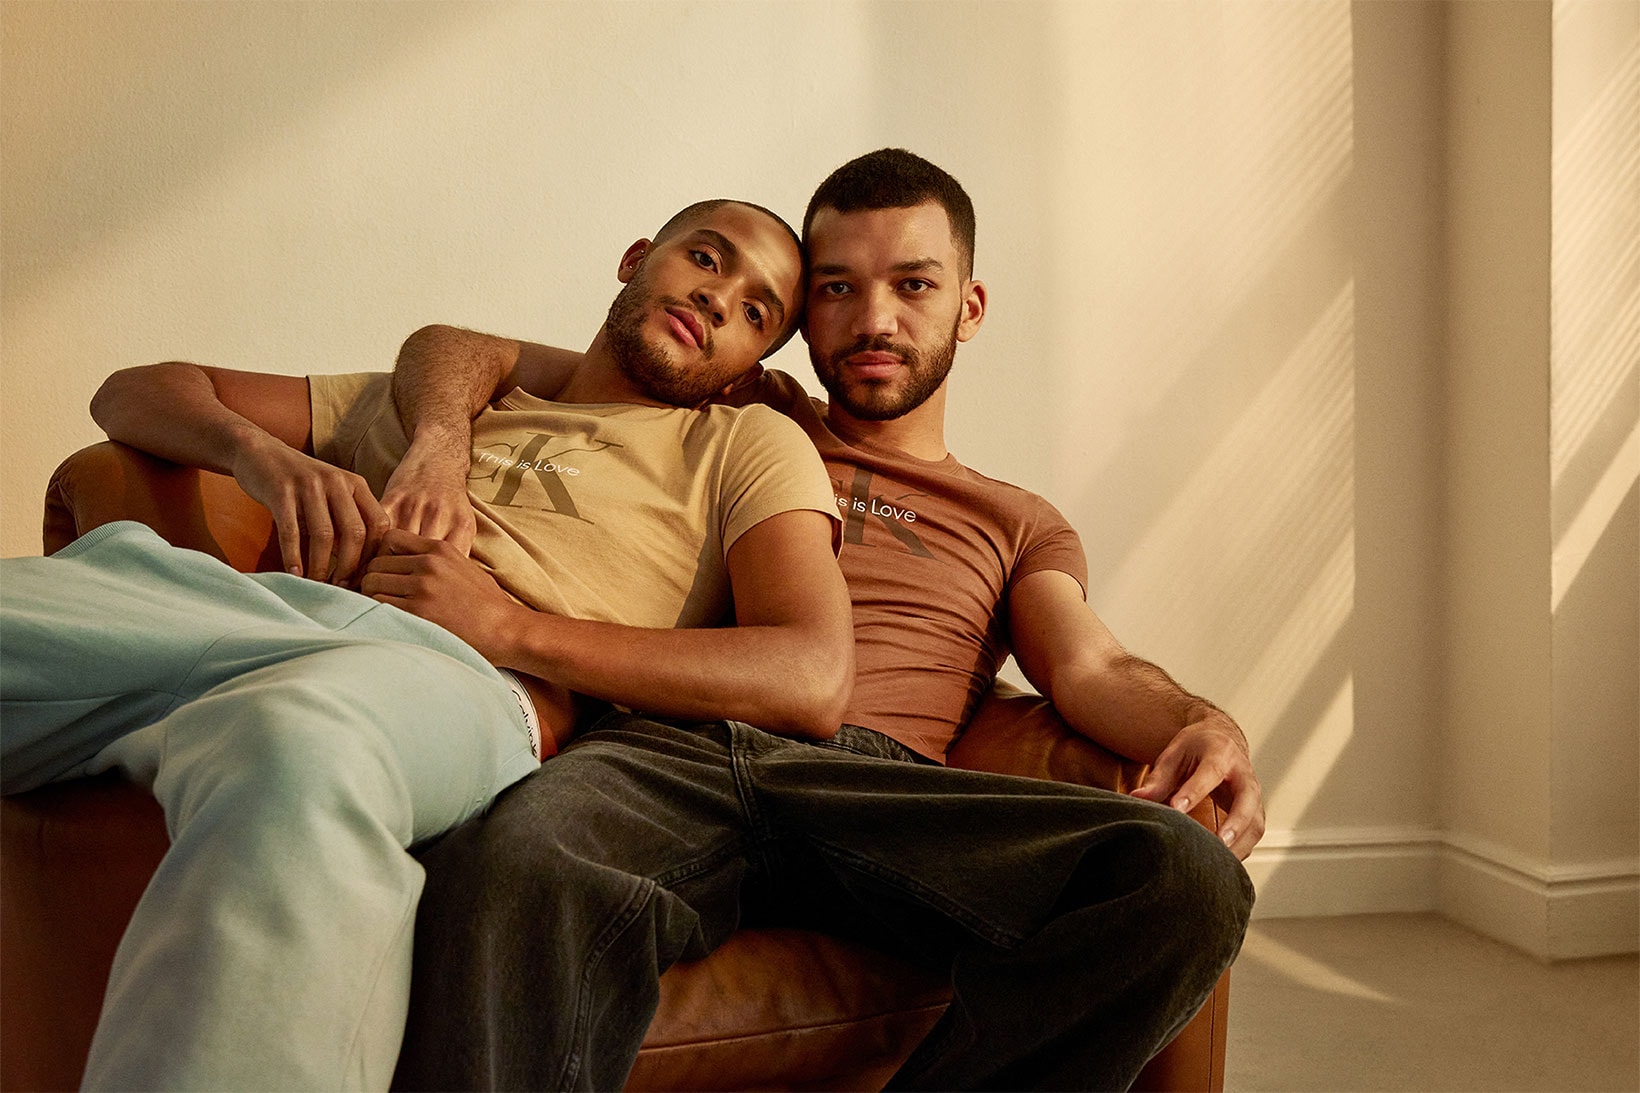 Calvin Klein's 'This is Love' Campaign for LGBT Pride Month